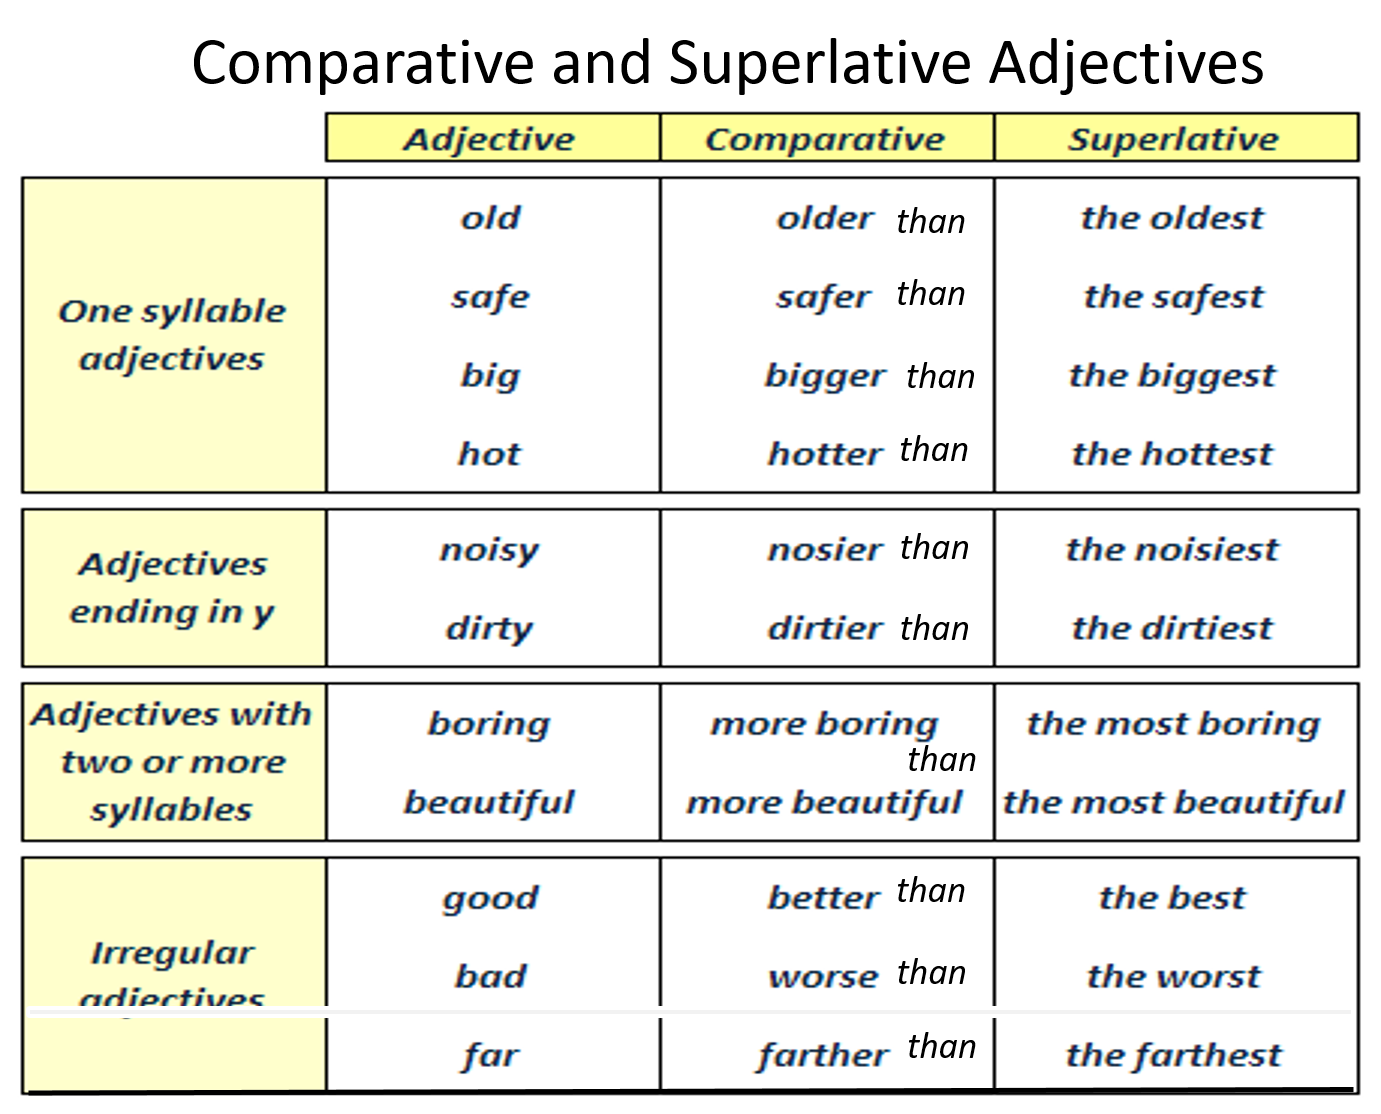 Comparatives and Superlatives правило таблица. Comparative adjectives таблица. Таблица Comparative and Superlative. Comparatives and Superlatives правило. Comparative examples